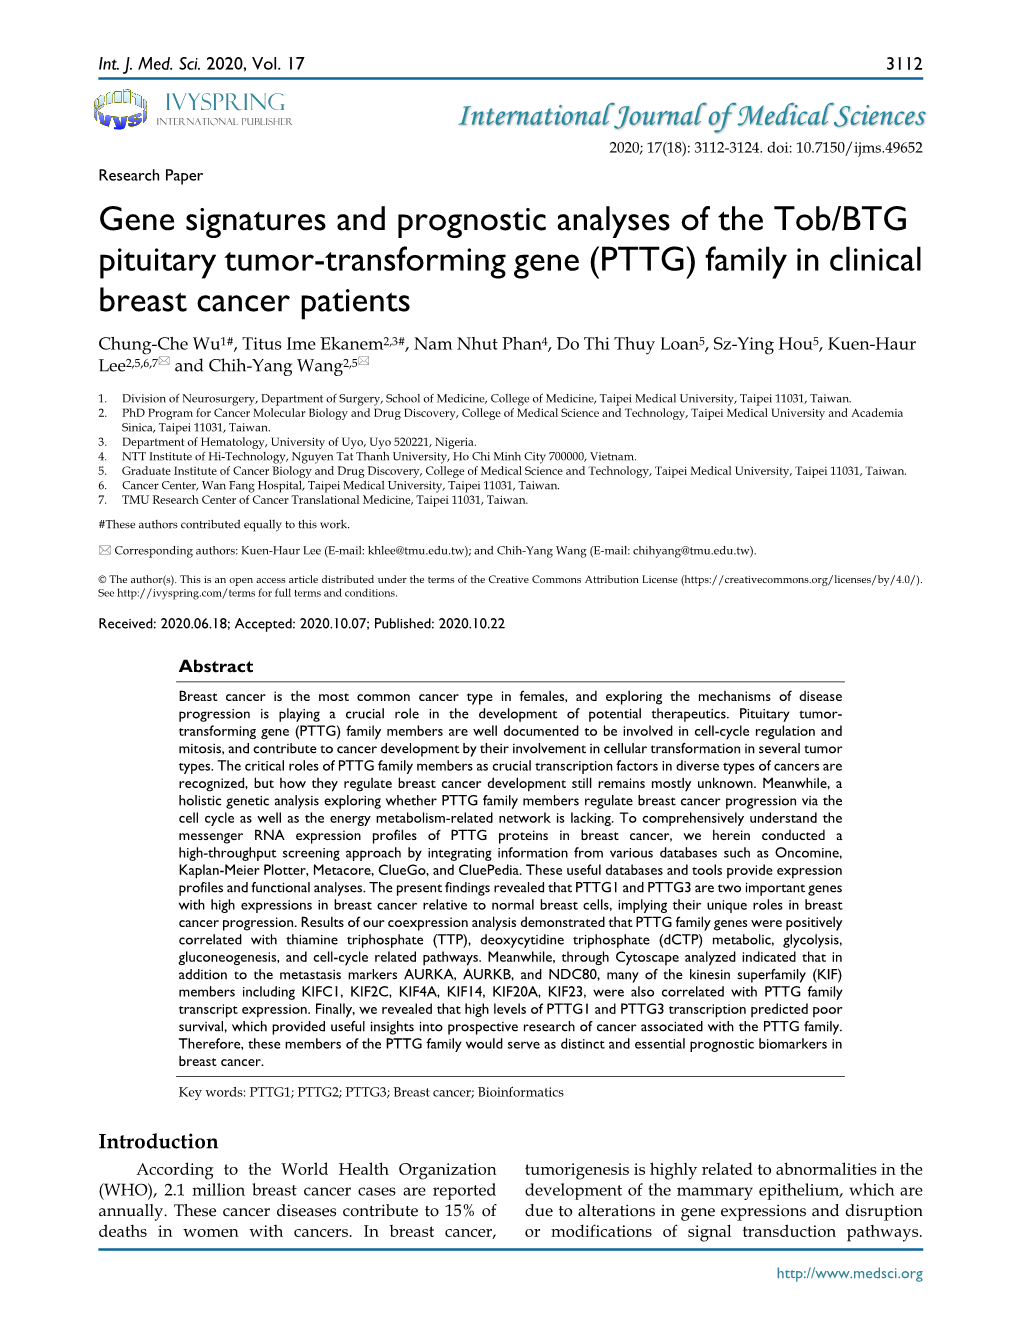 (PTTG) Family in Clinical Breast Cancer